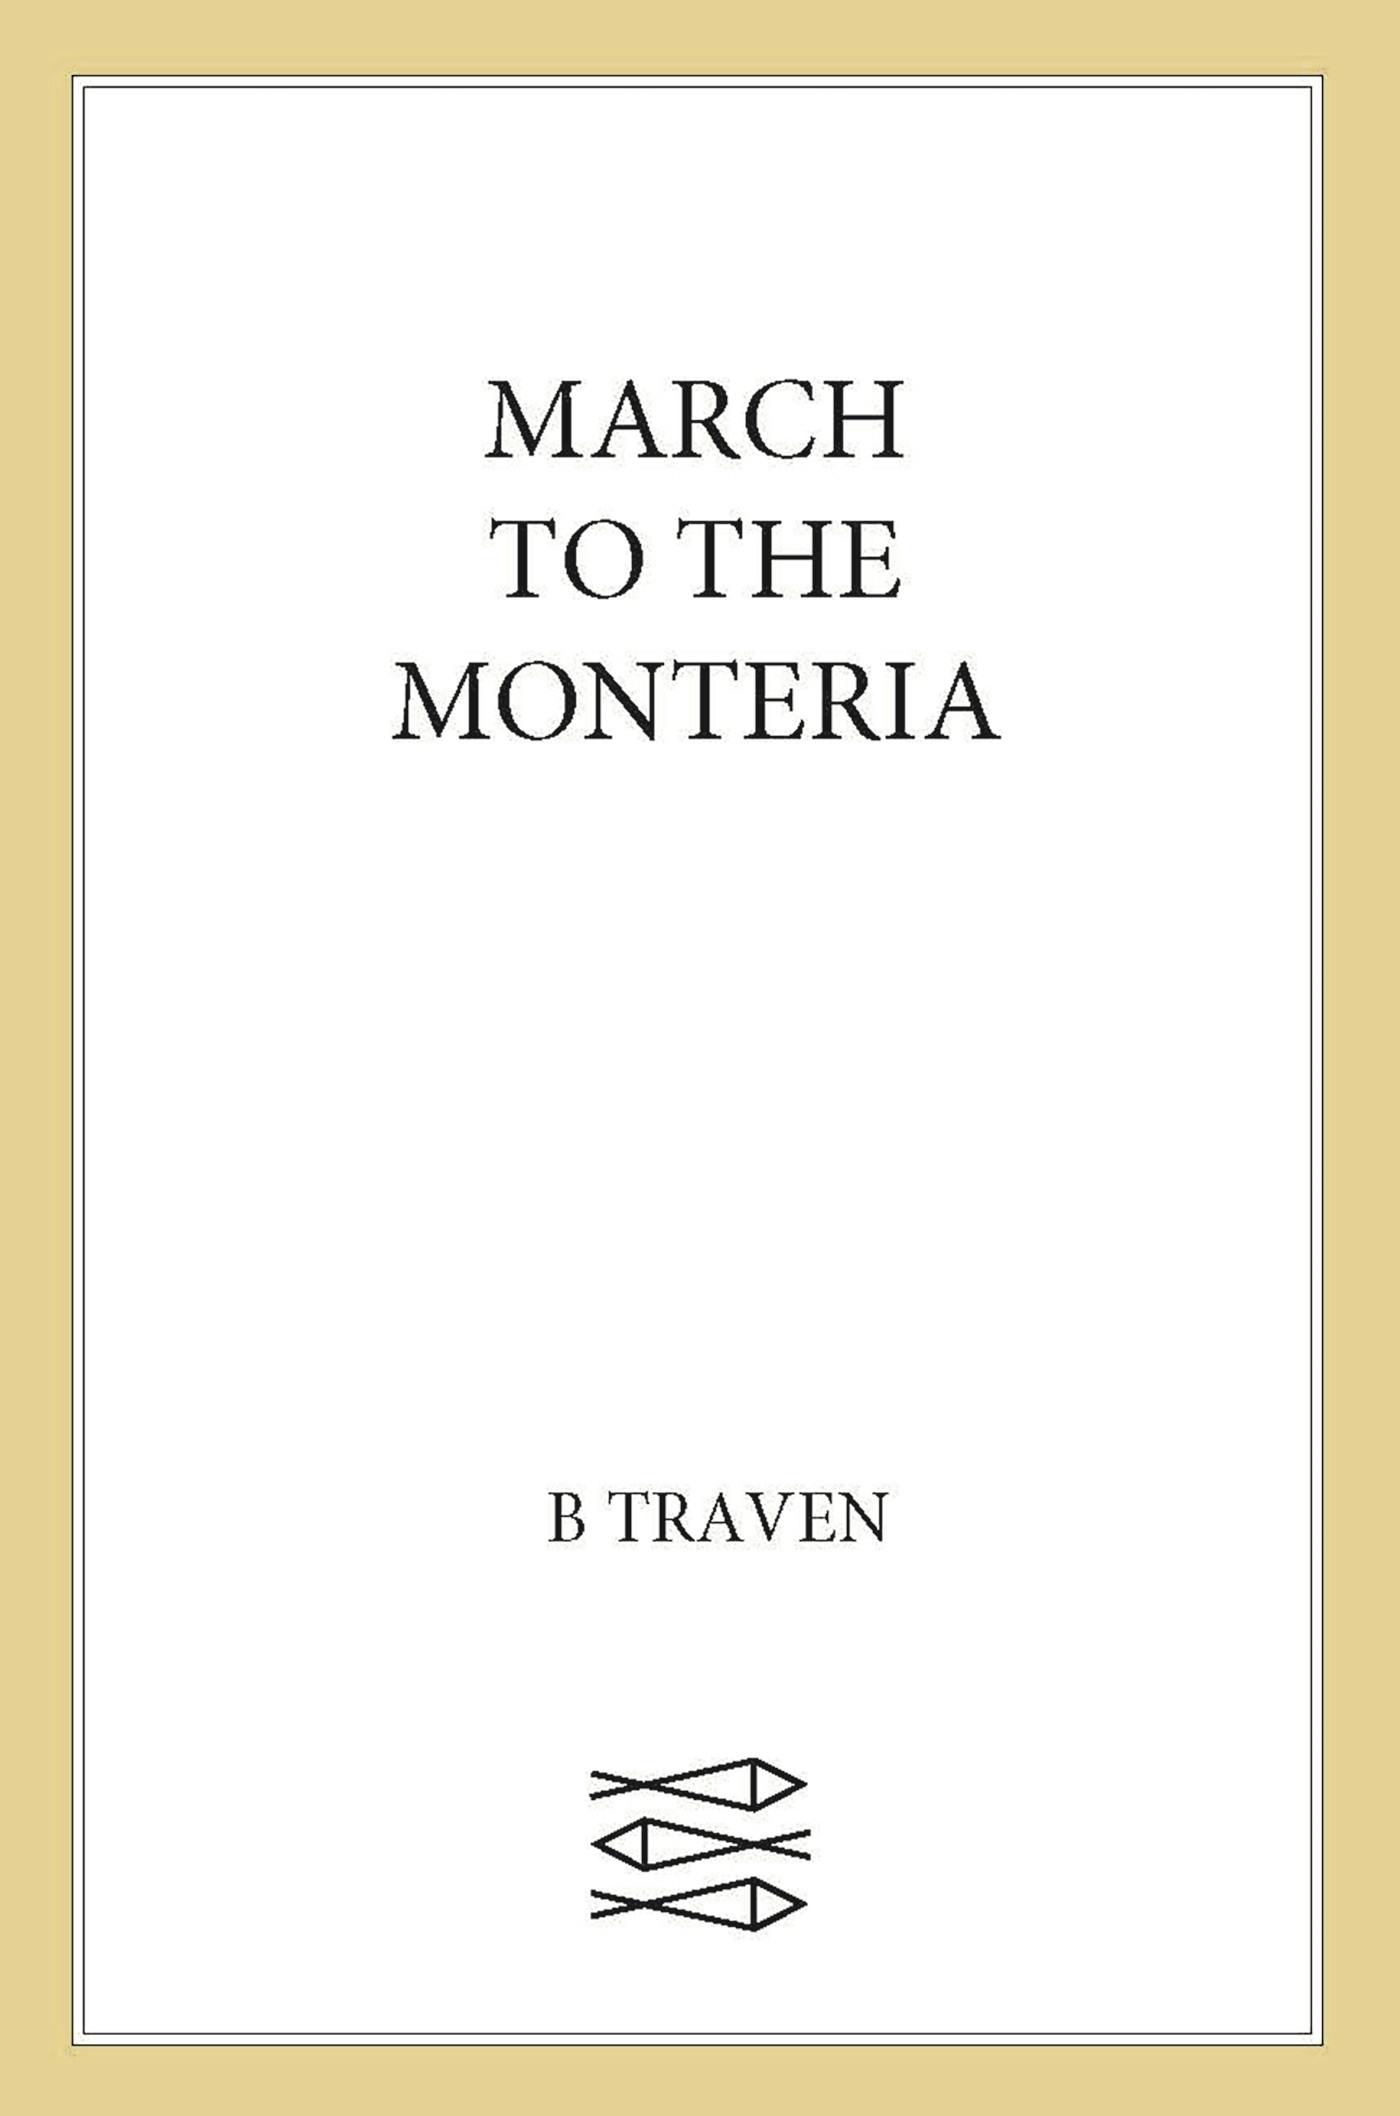 Image of March to the Monteria